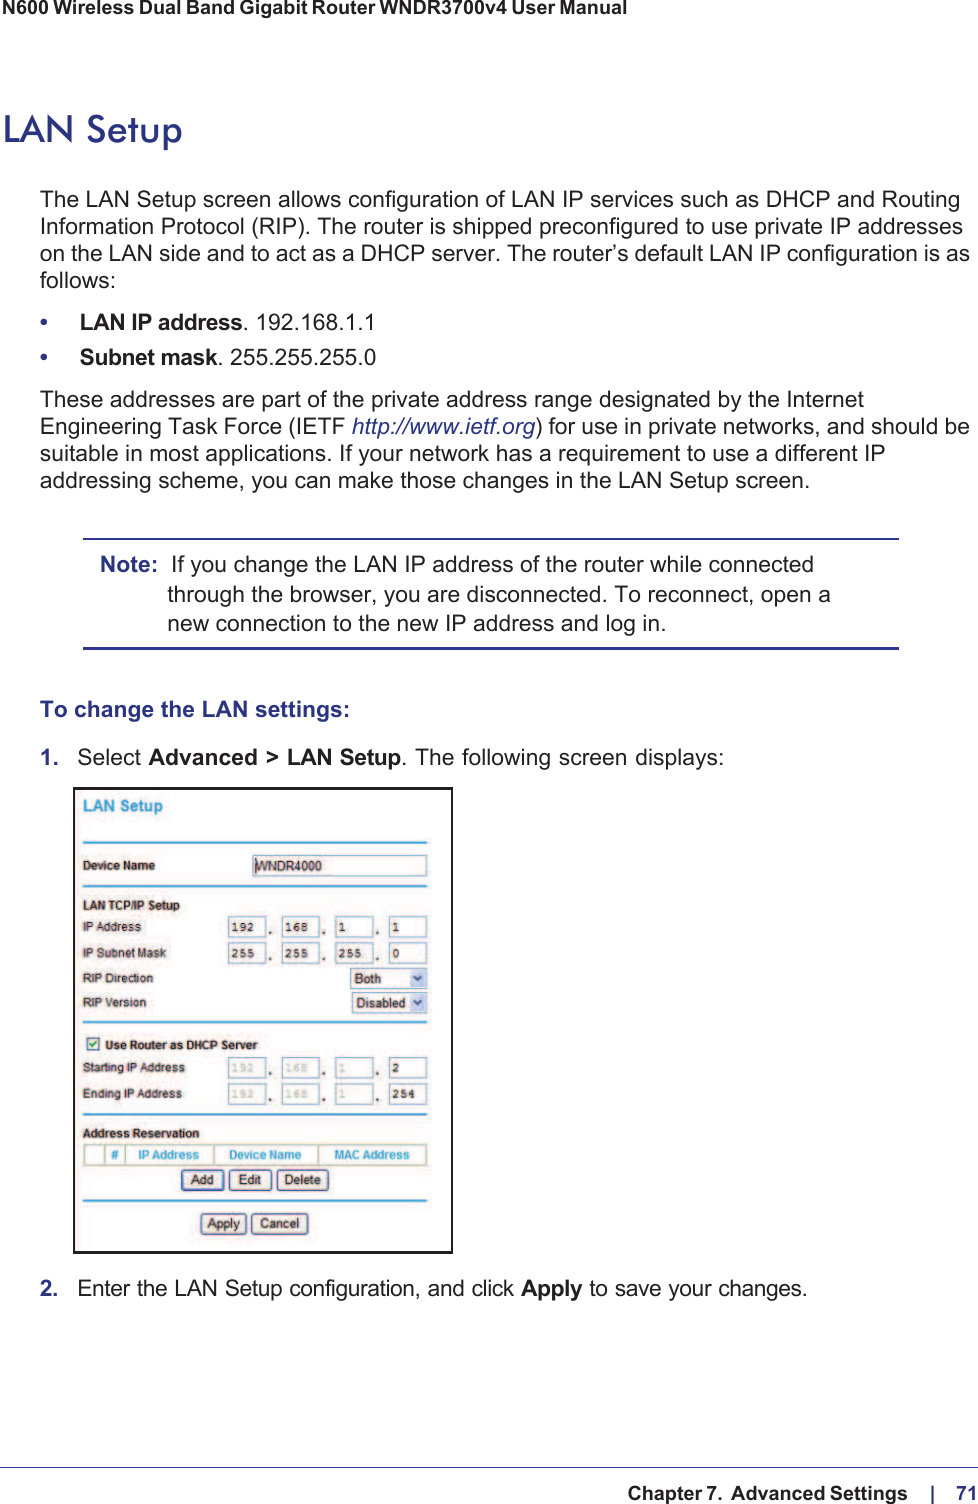   Chapter 7.  Advanced Settings     |    71N600 Wireless Dual Band Gigabit Router WNDR3700v4 User Manual LAN SetupThe LAN Setup screen allows configuration of LAN IP services such as DHCP and Routing Information Protocol (RIP). The router is shipped preconfigured to use private IP addresses on the LAN side and to act as a DHCP server. The router’s default LAN IP configuration is as follows:•LAN IP address. 192.168.1.1•Subnet mask. 255.255.255.0These addresses are part of the private address range designated by the Internet Engineering Task Force (IETF http://www.ietf.org) for use in private networks, and should be suitable in most applications. If your network has a requirement to use a different IP addressing scheme, you can make those changes in the LAN Setup screen.Note: If you change the LAN IP address of the router while connected through the browser, you are disconnected. To reconnect, open a new connection to the new IP address and log in.To change the LAN settings:1. Select Advanced &gt; LAN Setup. The following screen displays:2. Enter the LAN Setup configuration, and click Apply to save your changes.